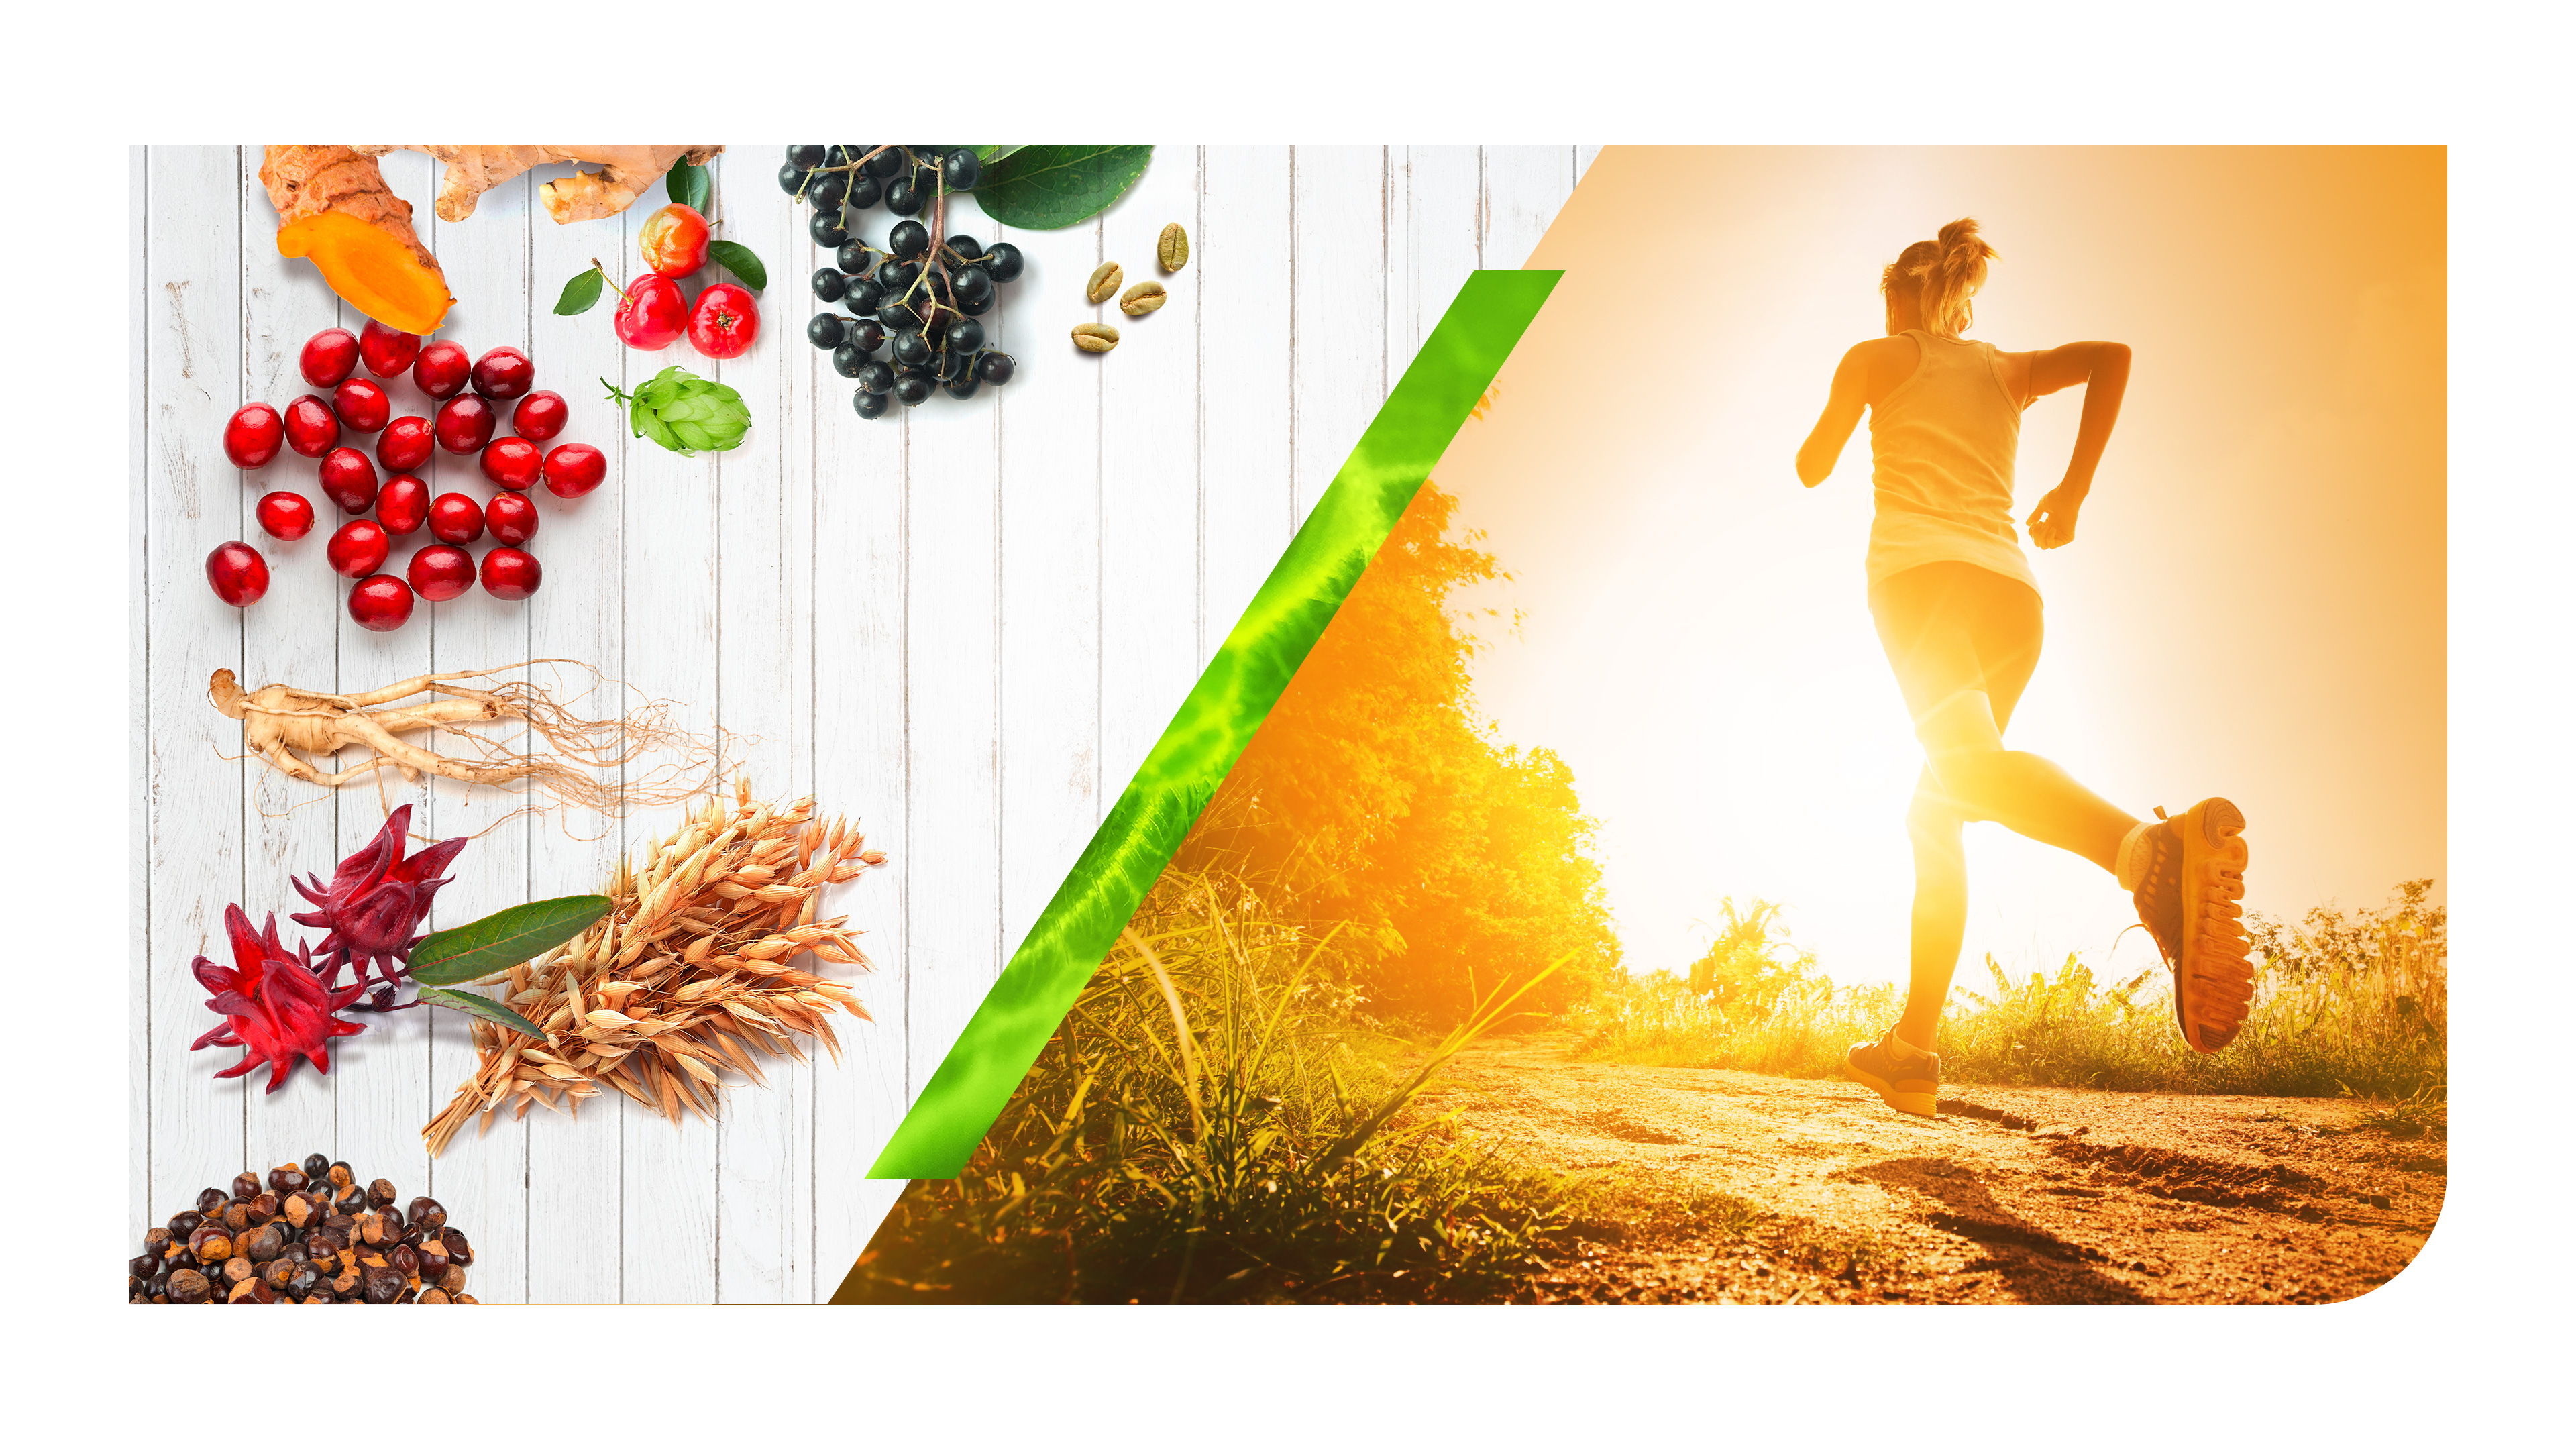 Sports nutrition will be a major focus for Naturex at Vitafoods Europe 2019